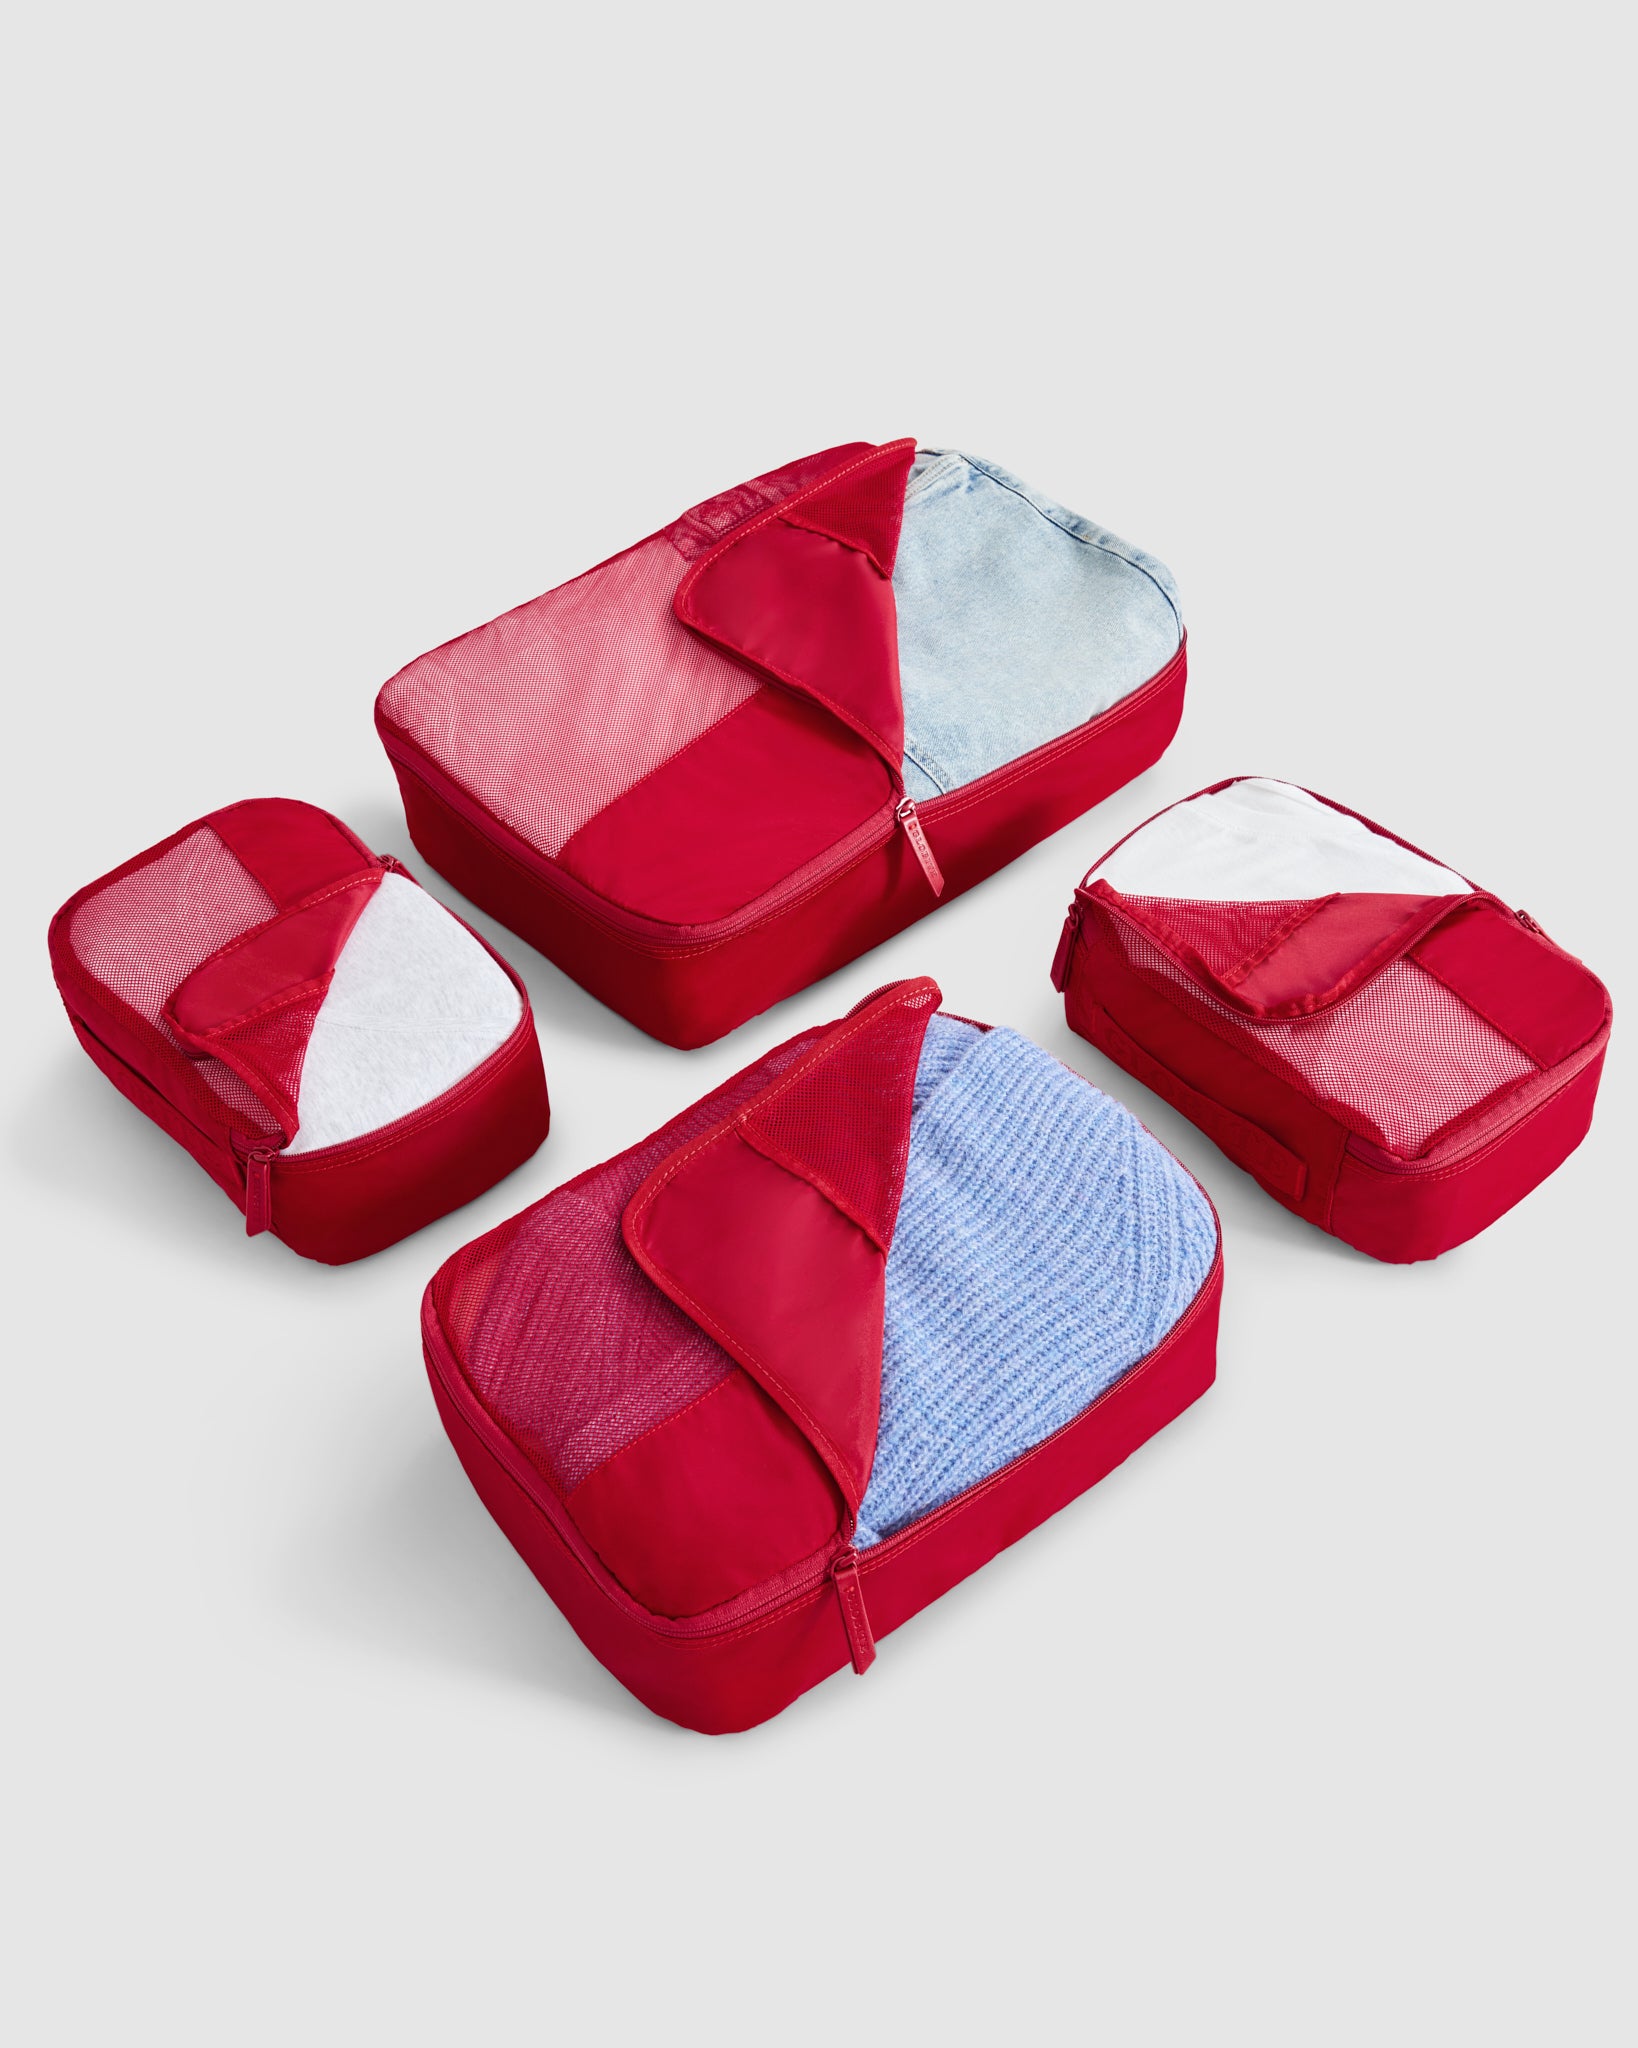 4 Piece Packing Cube in Lava Red